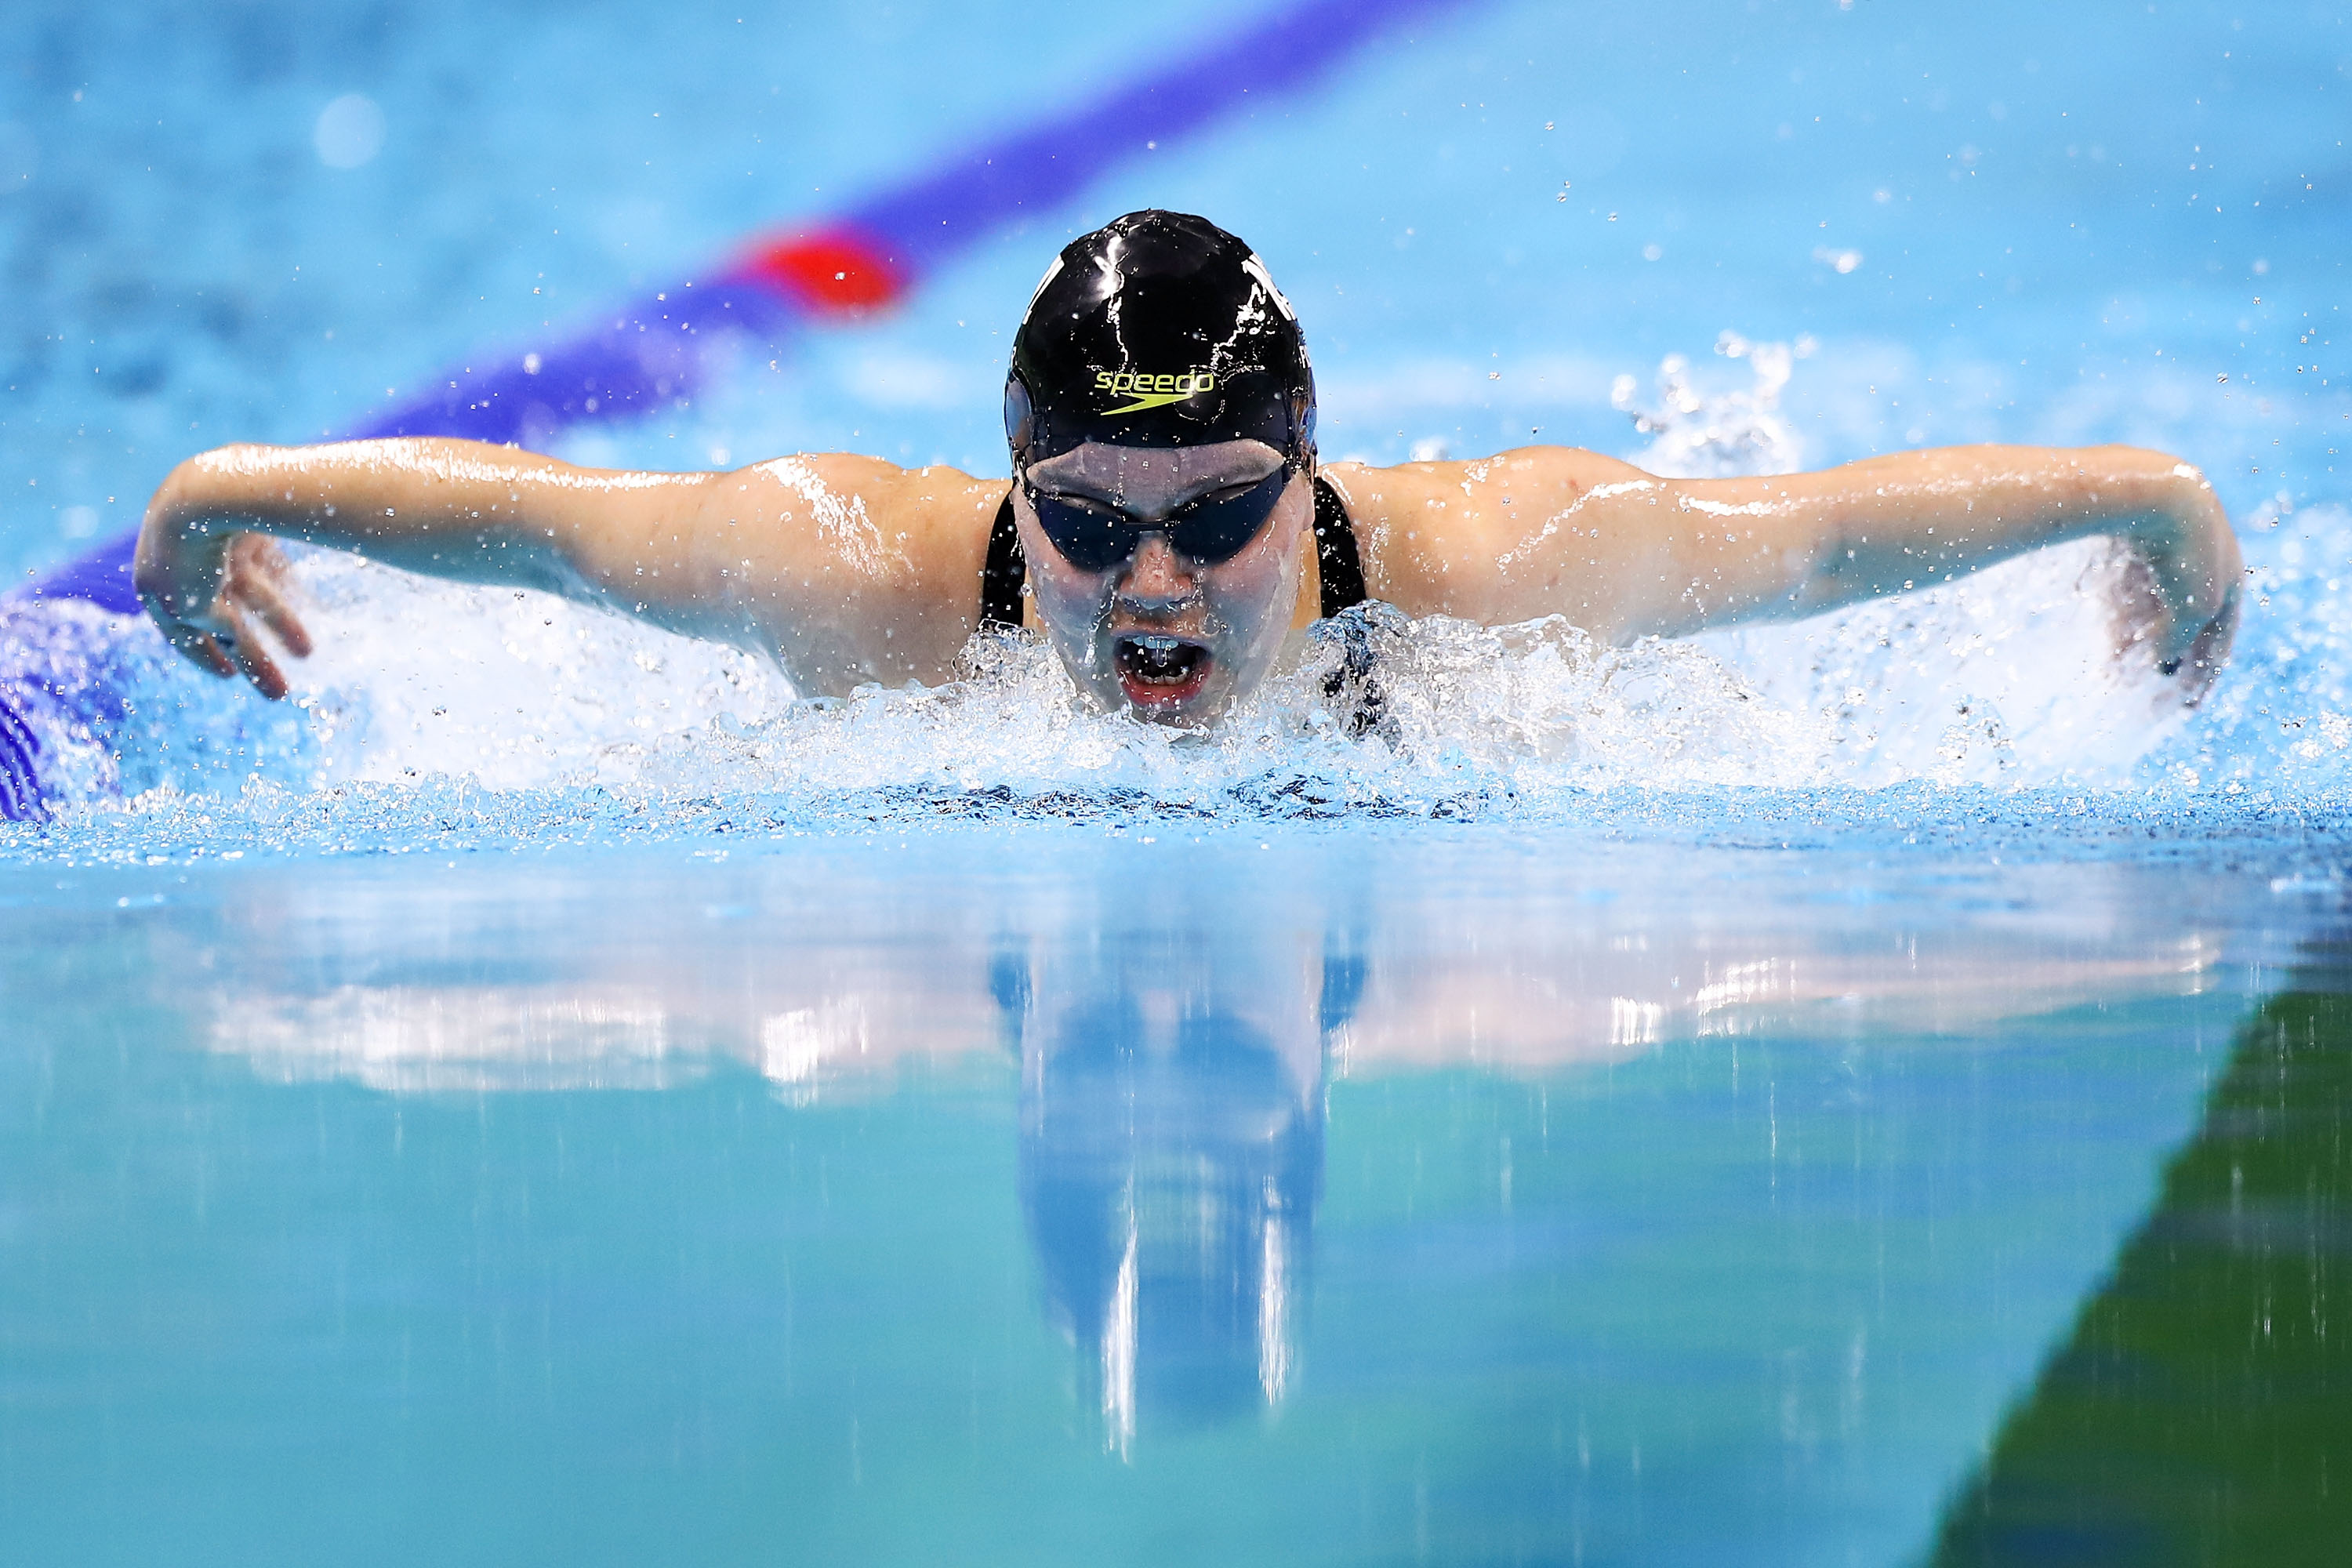 •	Mary Fisher competing in the Women’s 200m Individual Medley SM11 at the Rio 2016 Paralympic Games. Credit: Getty Images